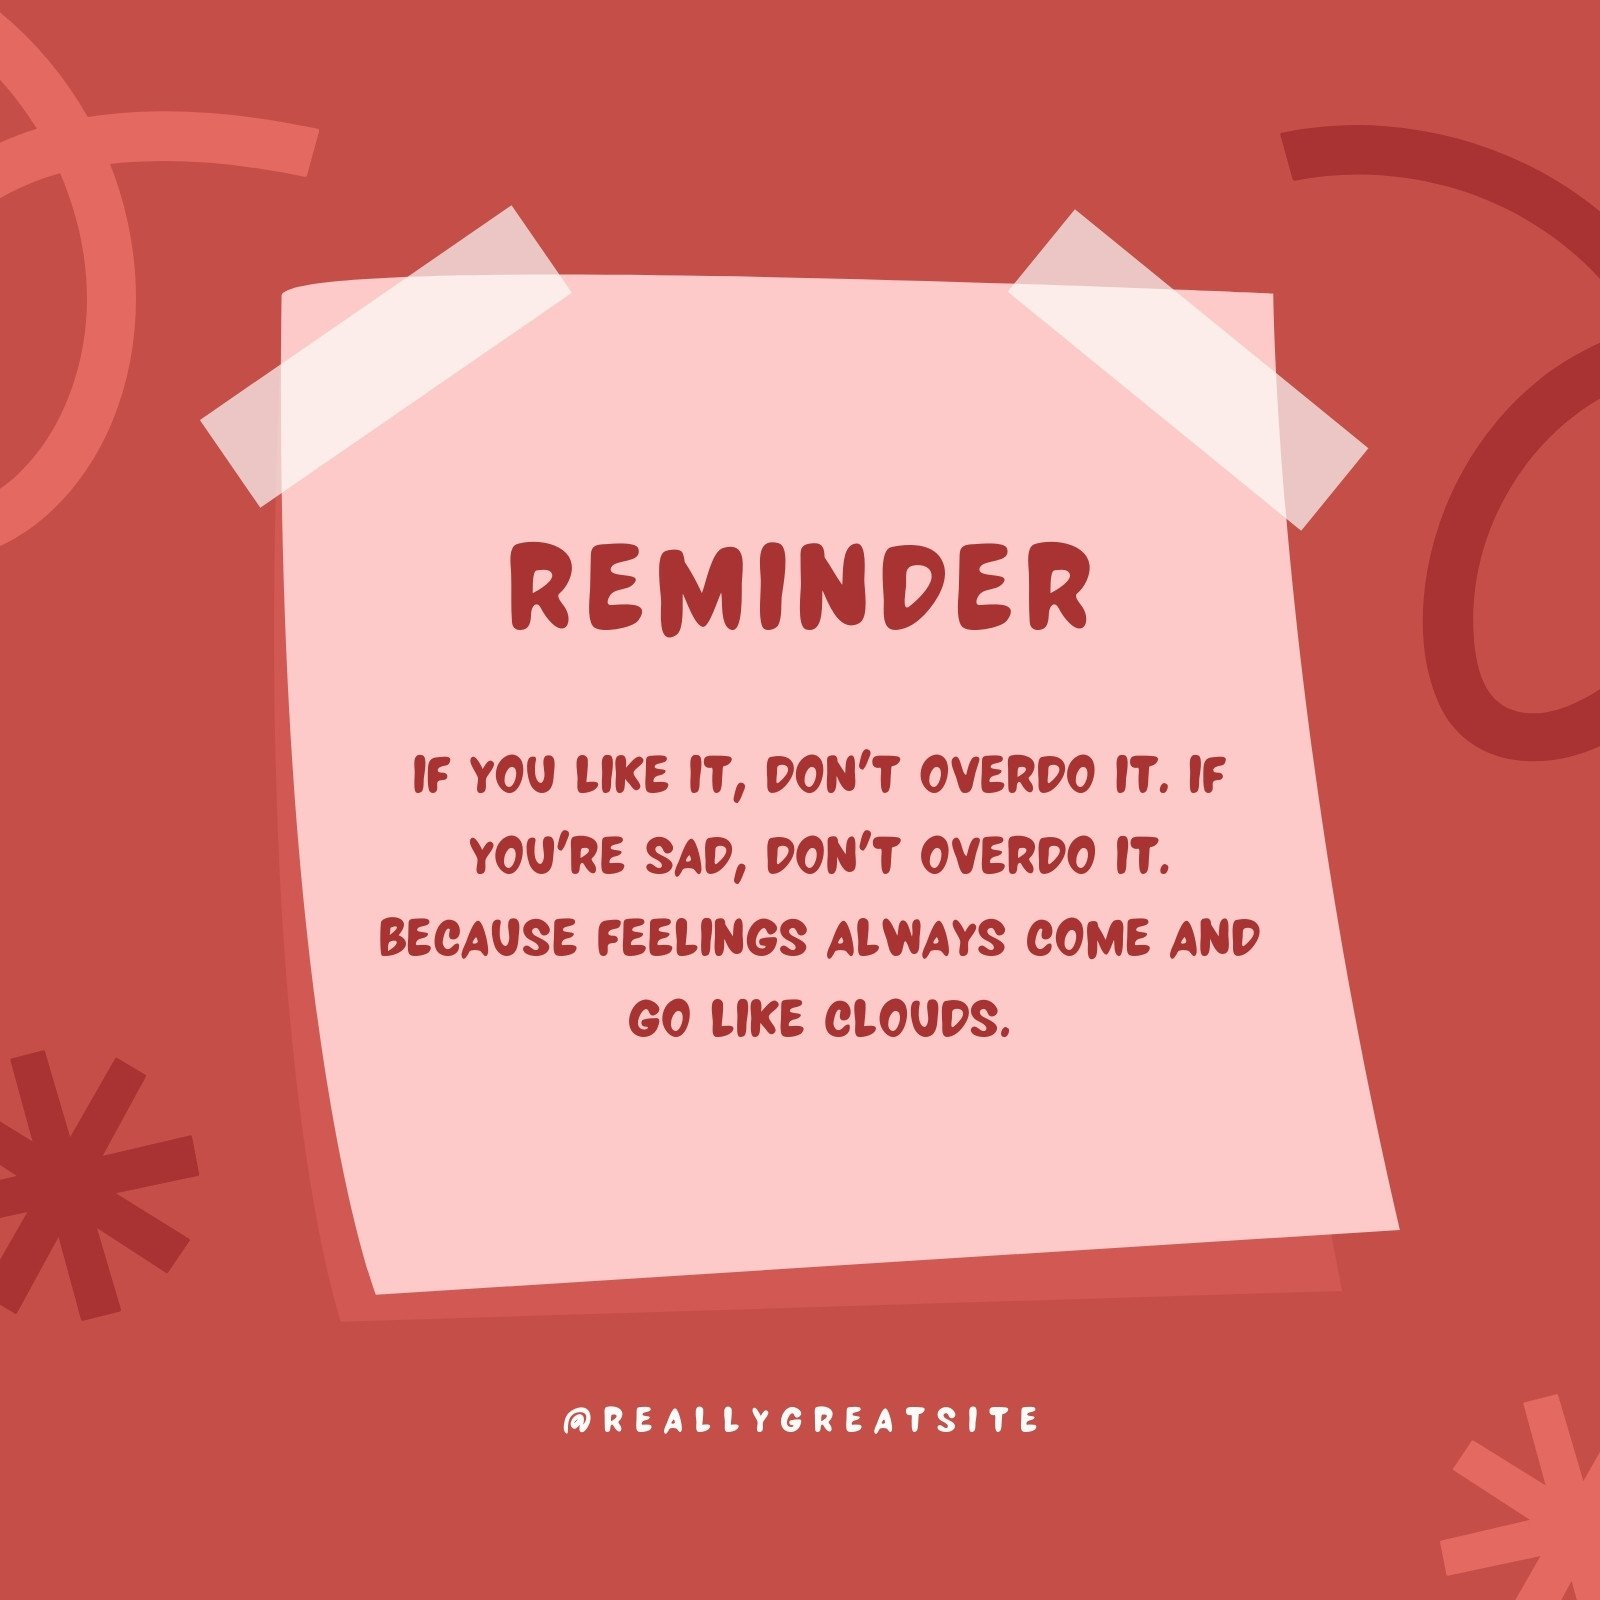 Free And Customizable Reminder Templates - Free Printable Reminder Templates